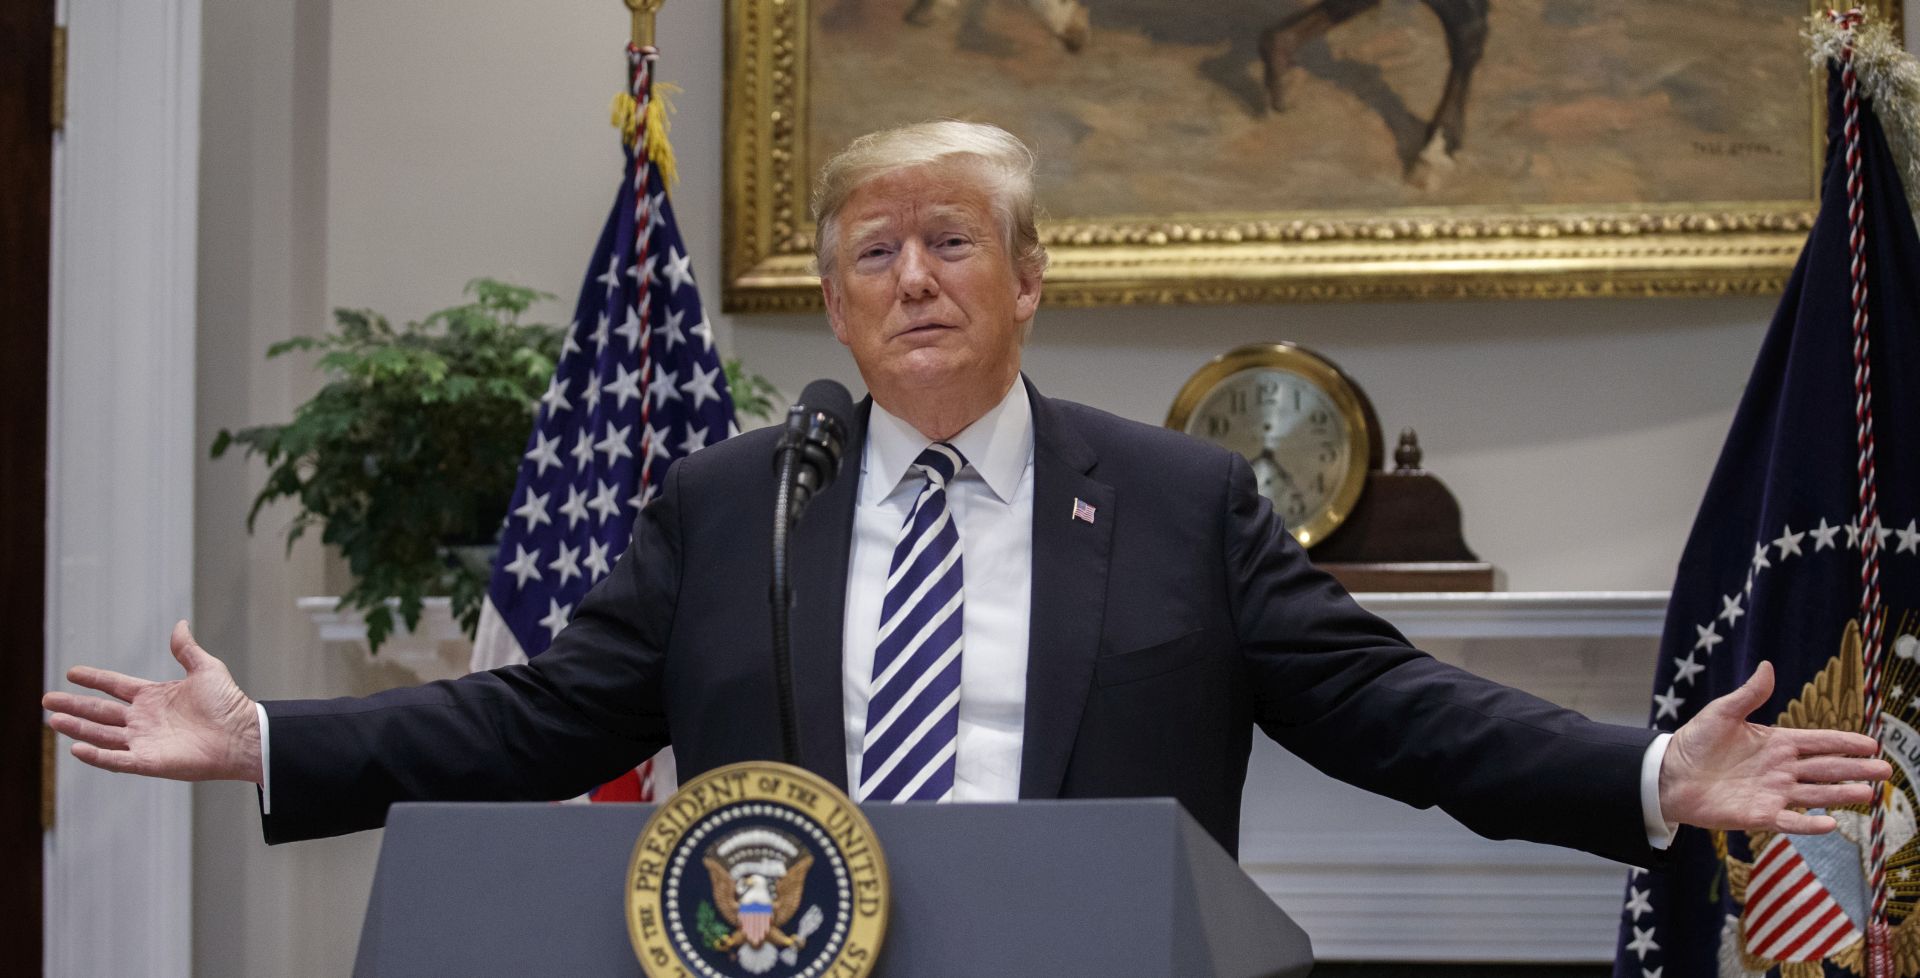 epa07135891 US President Donald J. Trump delivers remarks on immigration in the Roosevelt Room of the White House in Washington, DC, USA, 01 November 2018. President Trump seeks to change asylum rules and require immigrants to request asylum only at legal points of entry.  EPA/SHAWN THEW